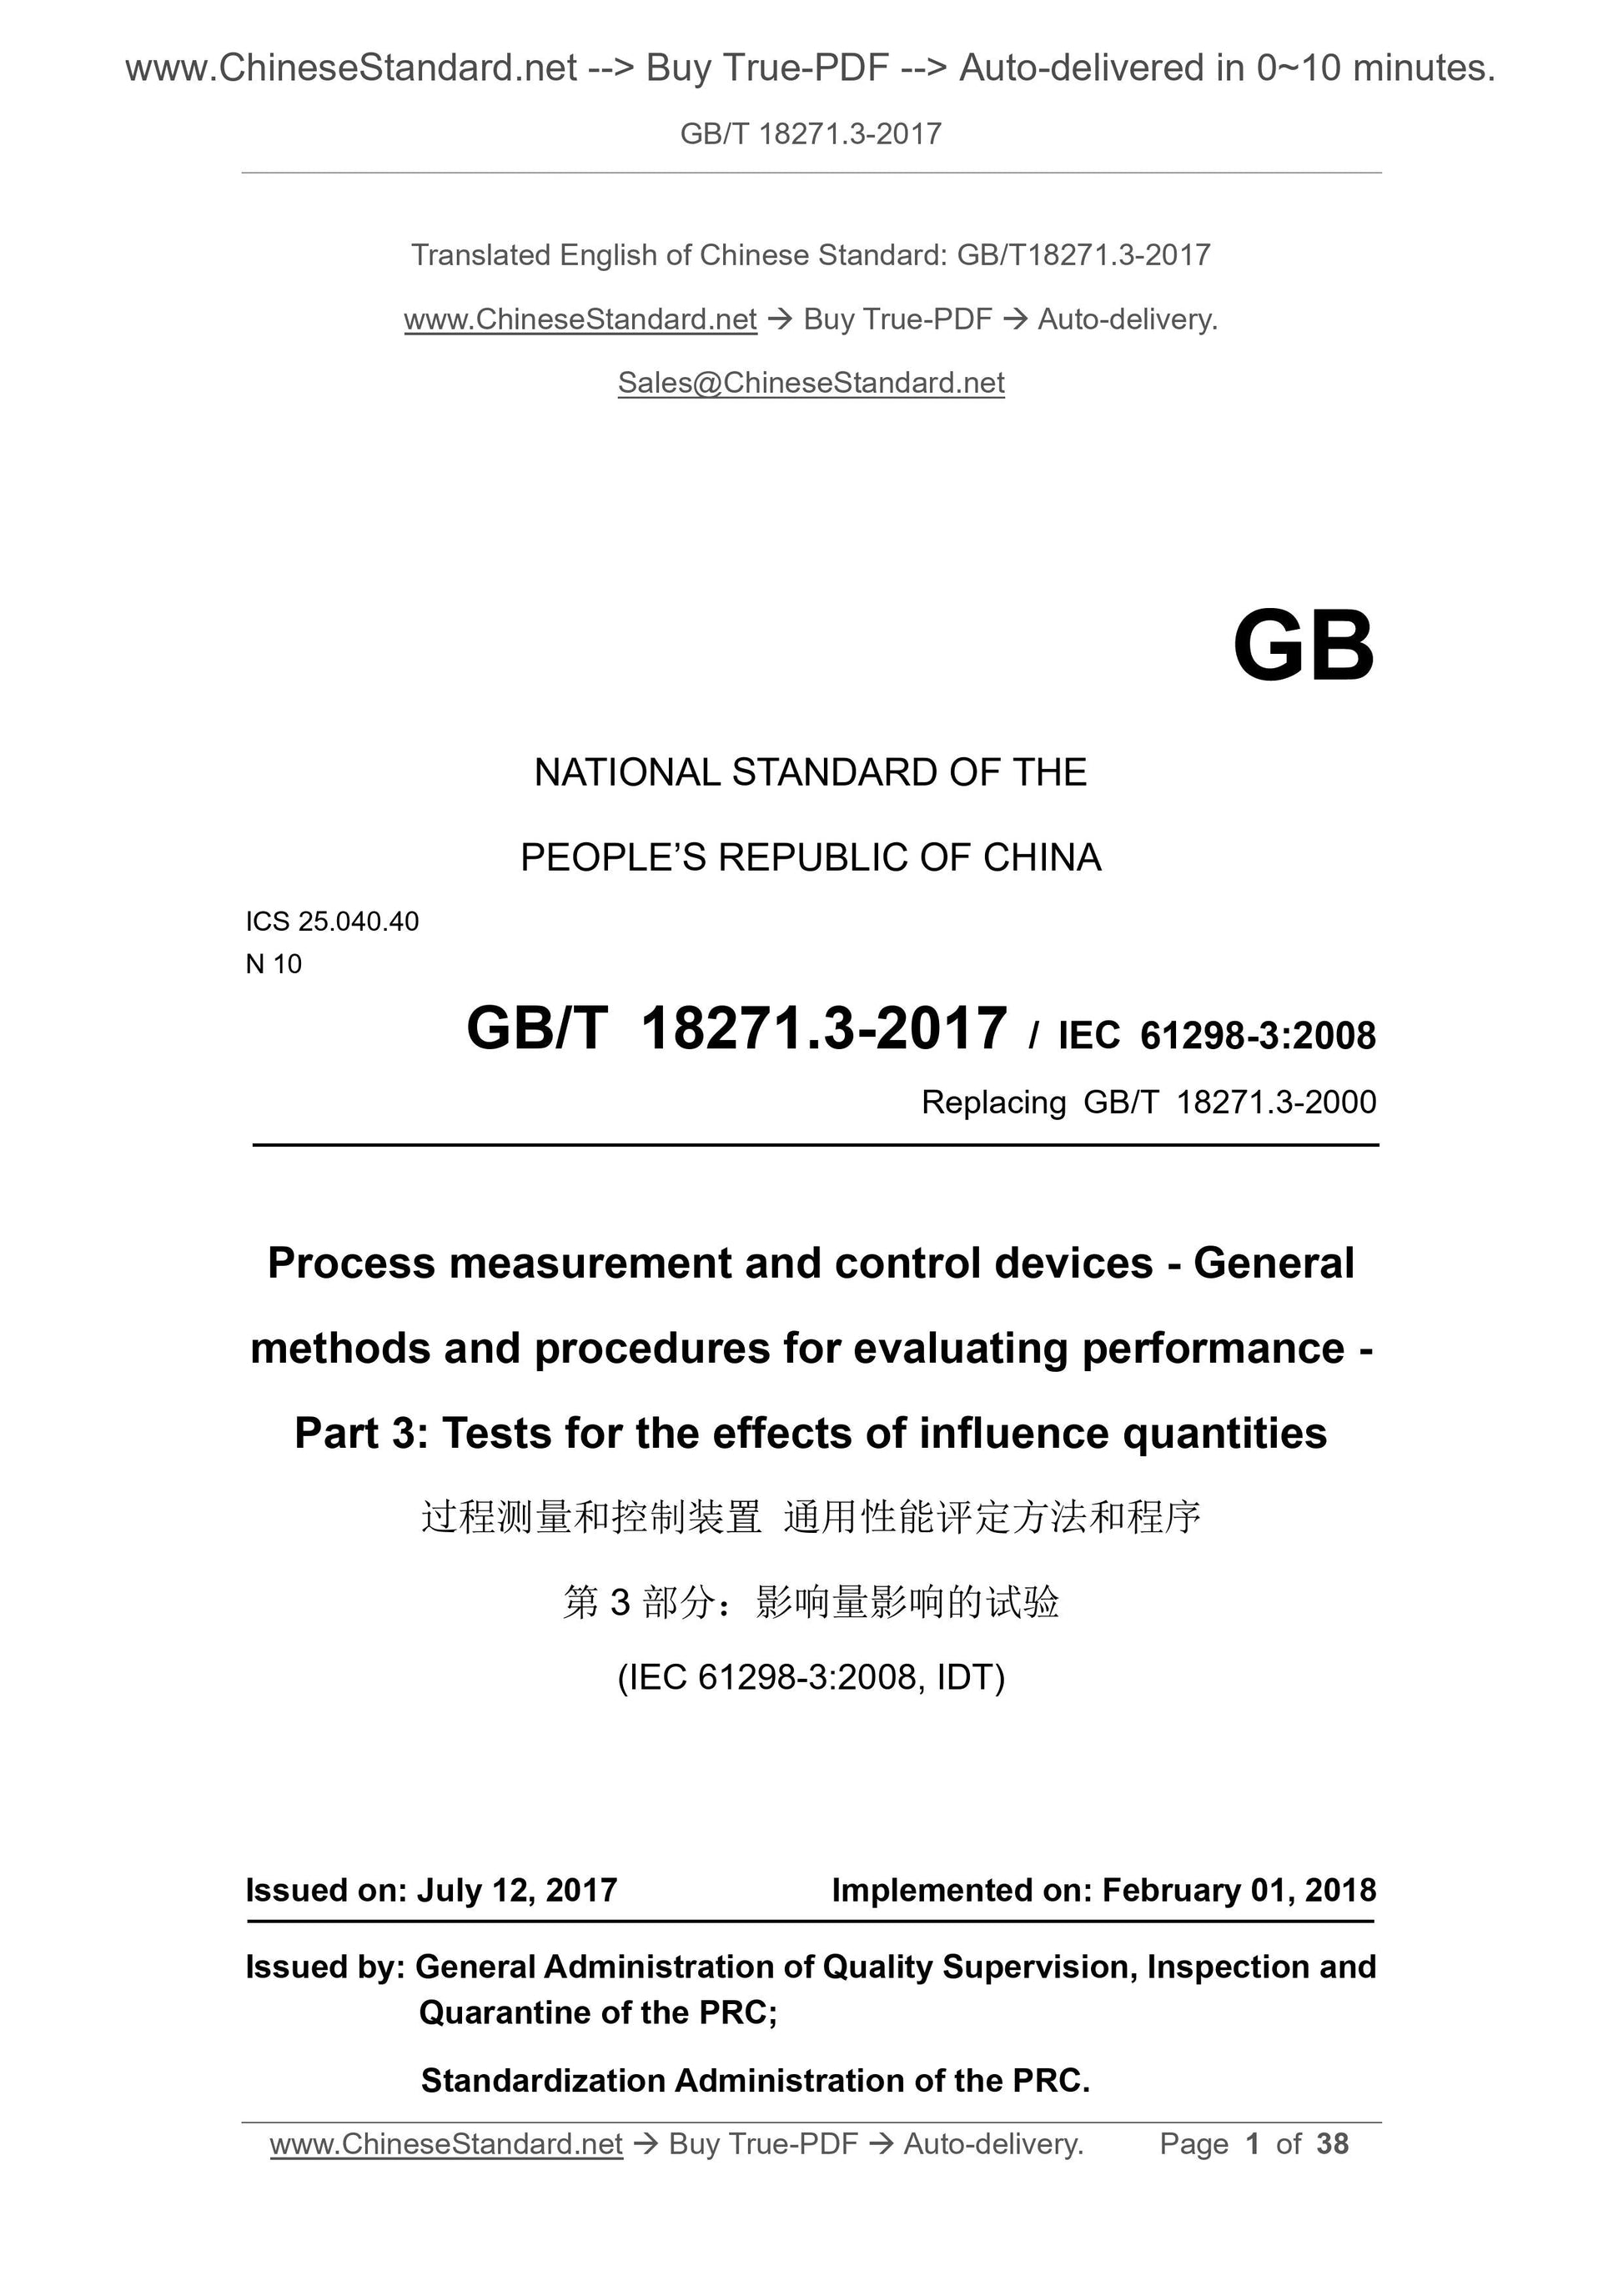 GB/T 18271.3-2017 Page 1